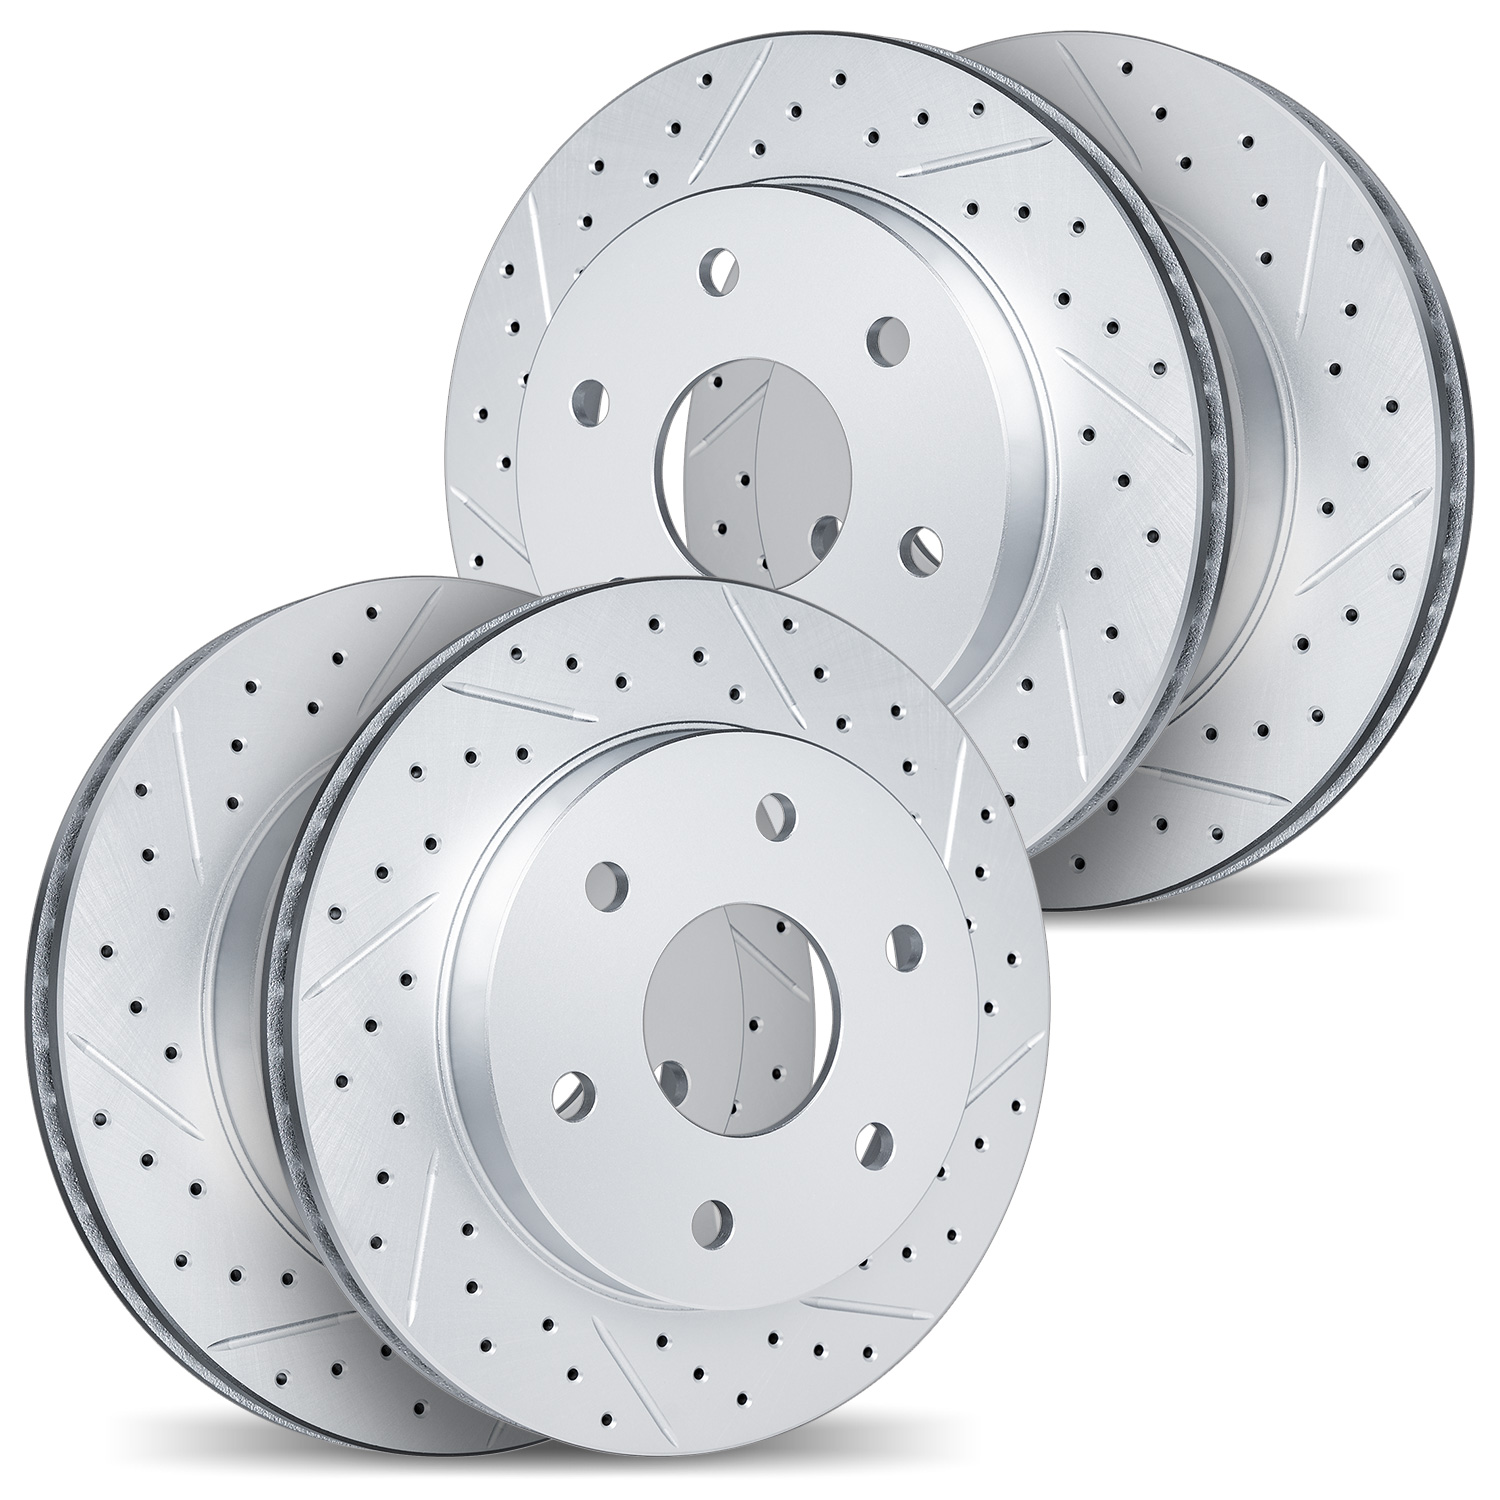 2004-37000 Geoperformance Drilled/Slotted Brake Rotors, 1992-2002 Multiple Makes/Models, Position: Front and Rear